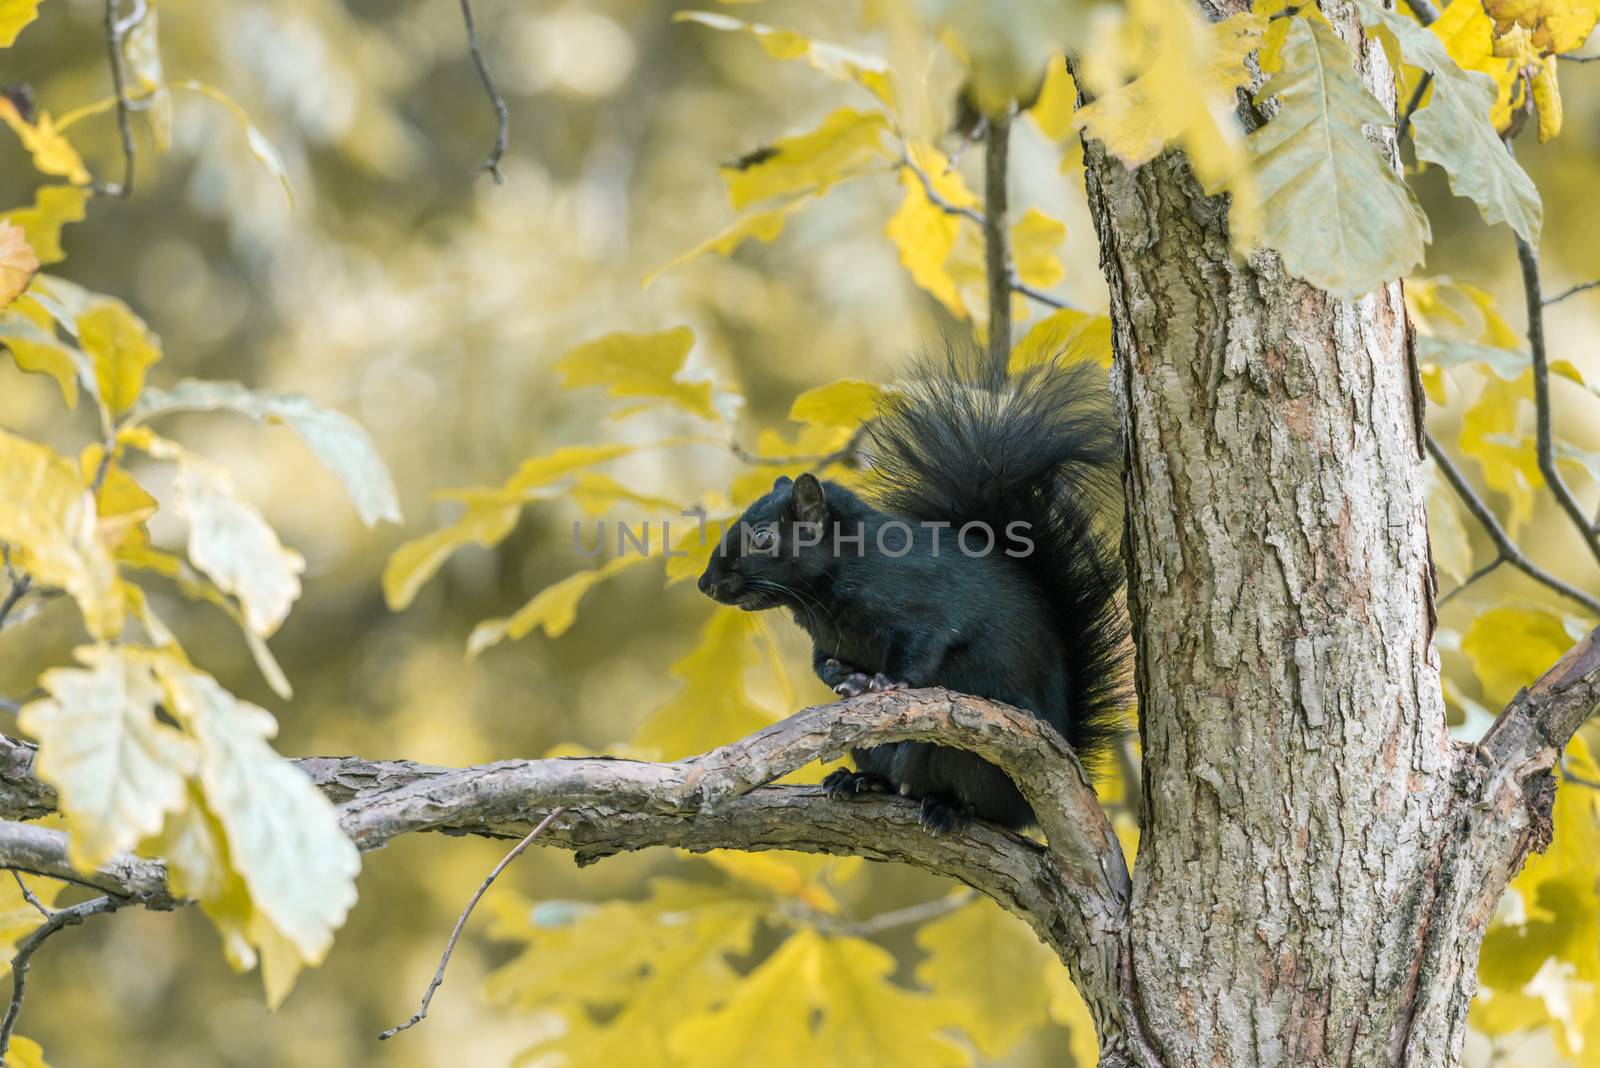 Black squirrel looking for food during autumn time in forest